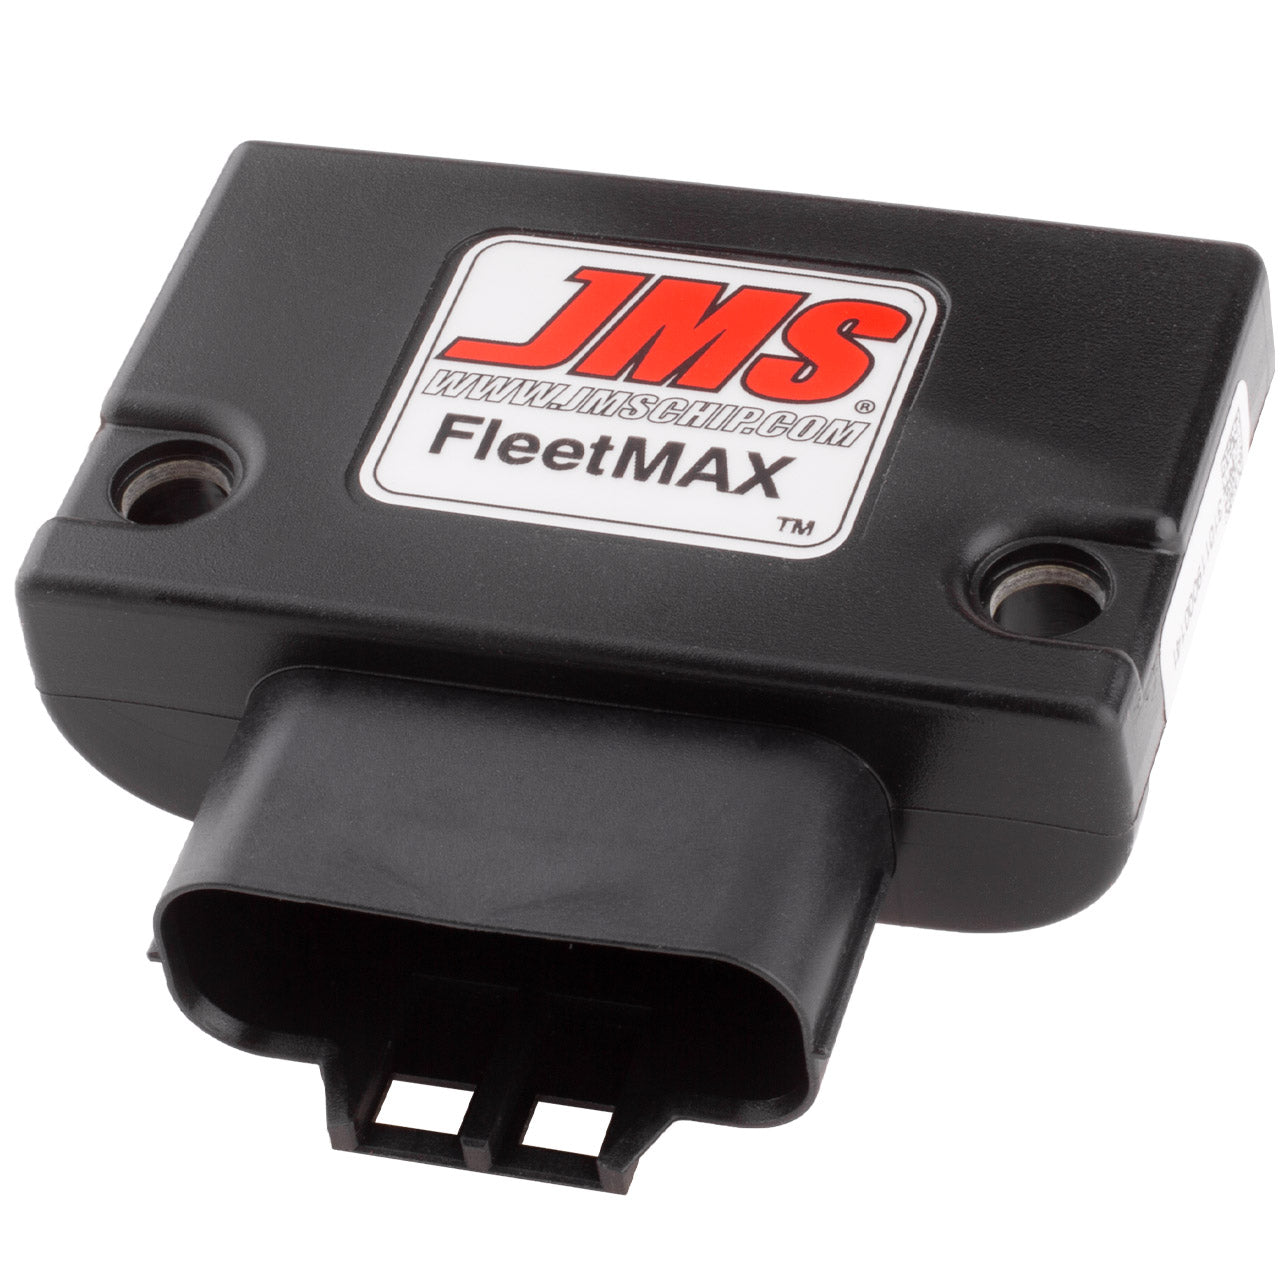 JMS FleetMAX Speed Control Device. Plug and Play for some 2012 - 2021 Nissan Vehicles with electronic throttle control FX71219NSV1